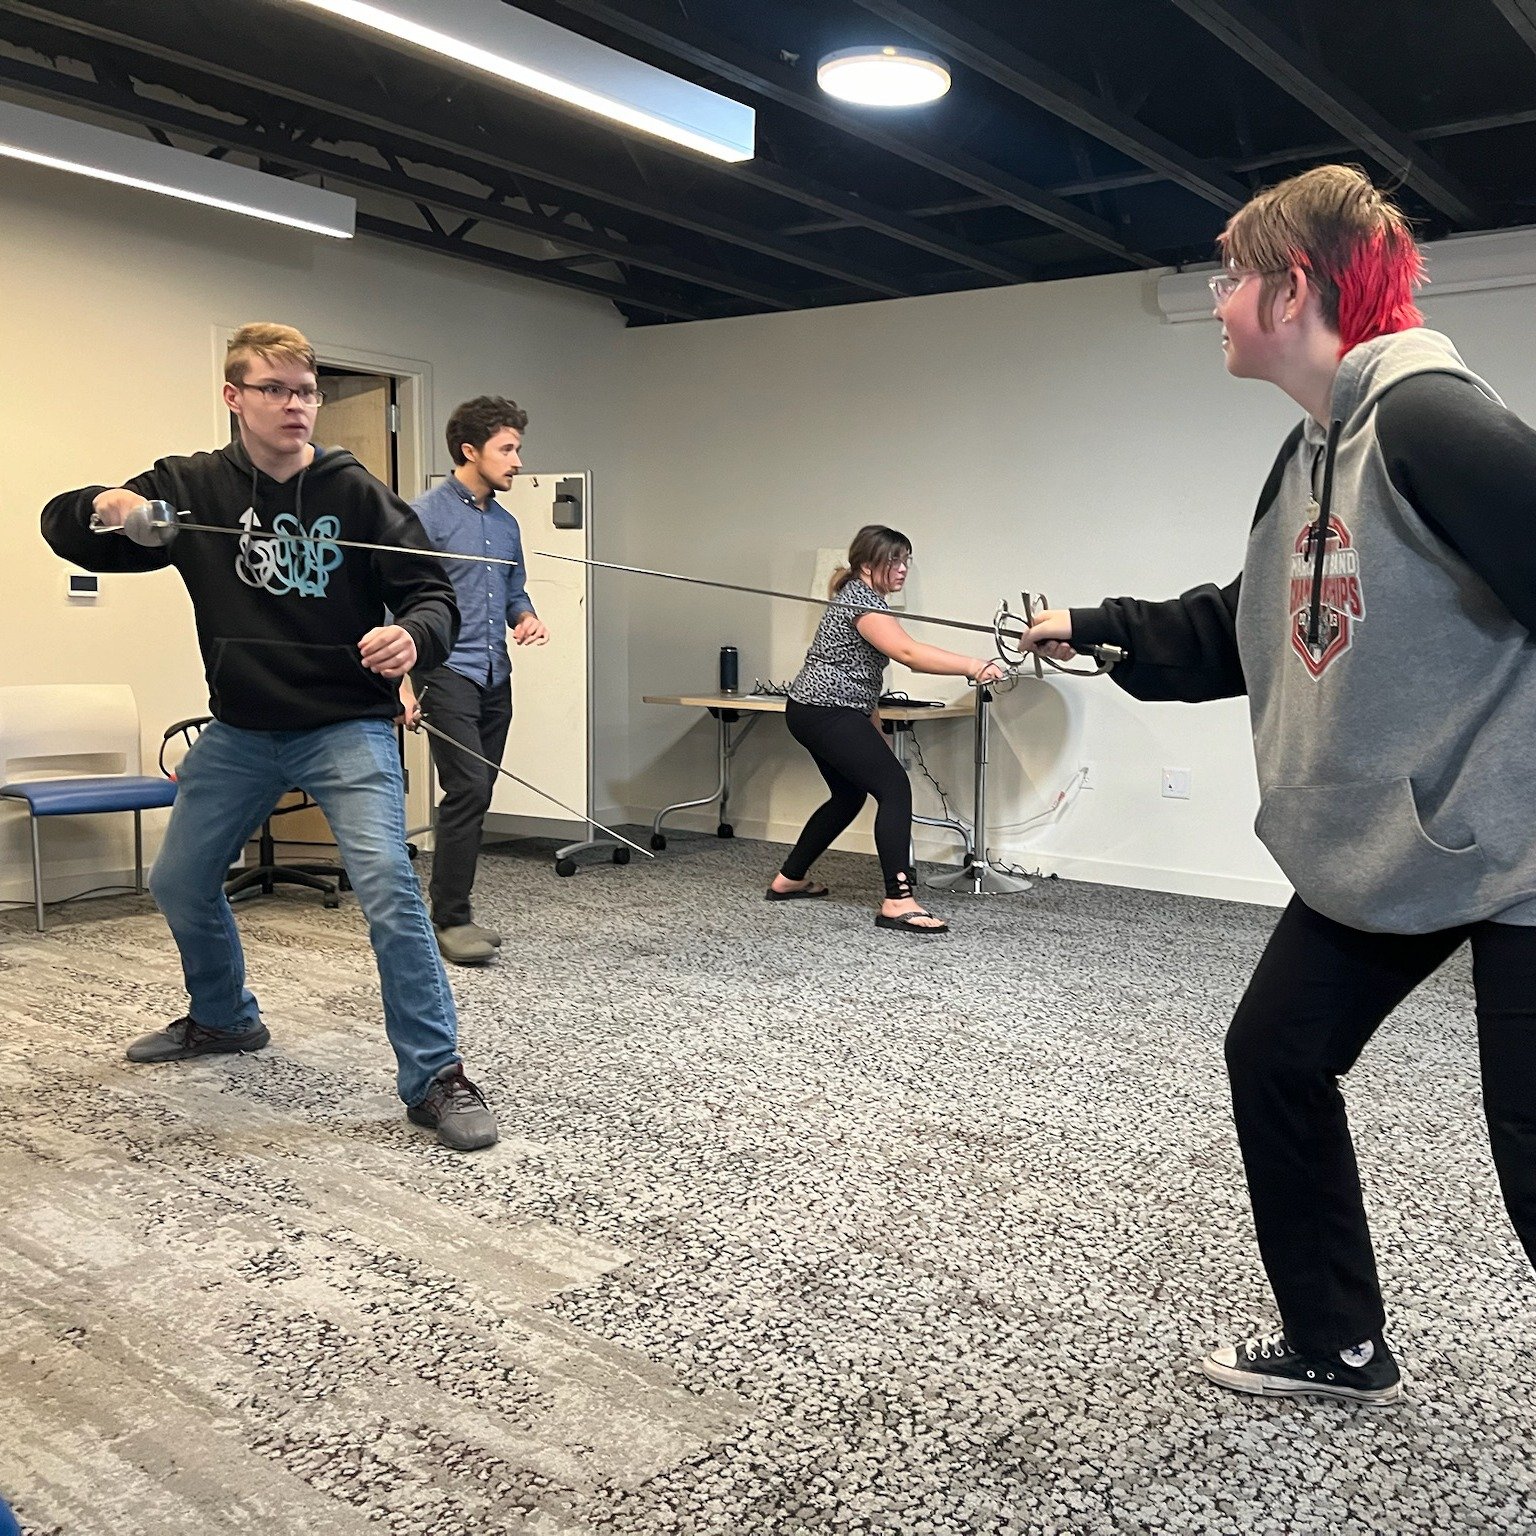 Huge #BYEPshoutout to @montana_shakespeare for hosting a three part elective series on stage combat fighting and story telling with our bodies for BYEP teens! In the series we learned how to fake pull hair, slap, and punch. We also learned about the 